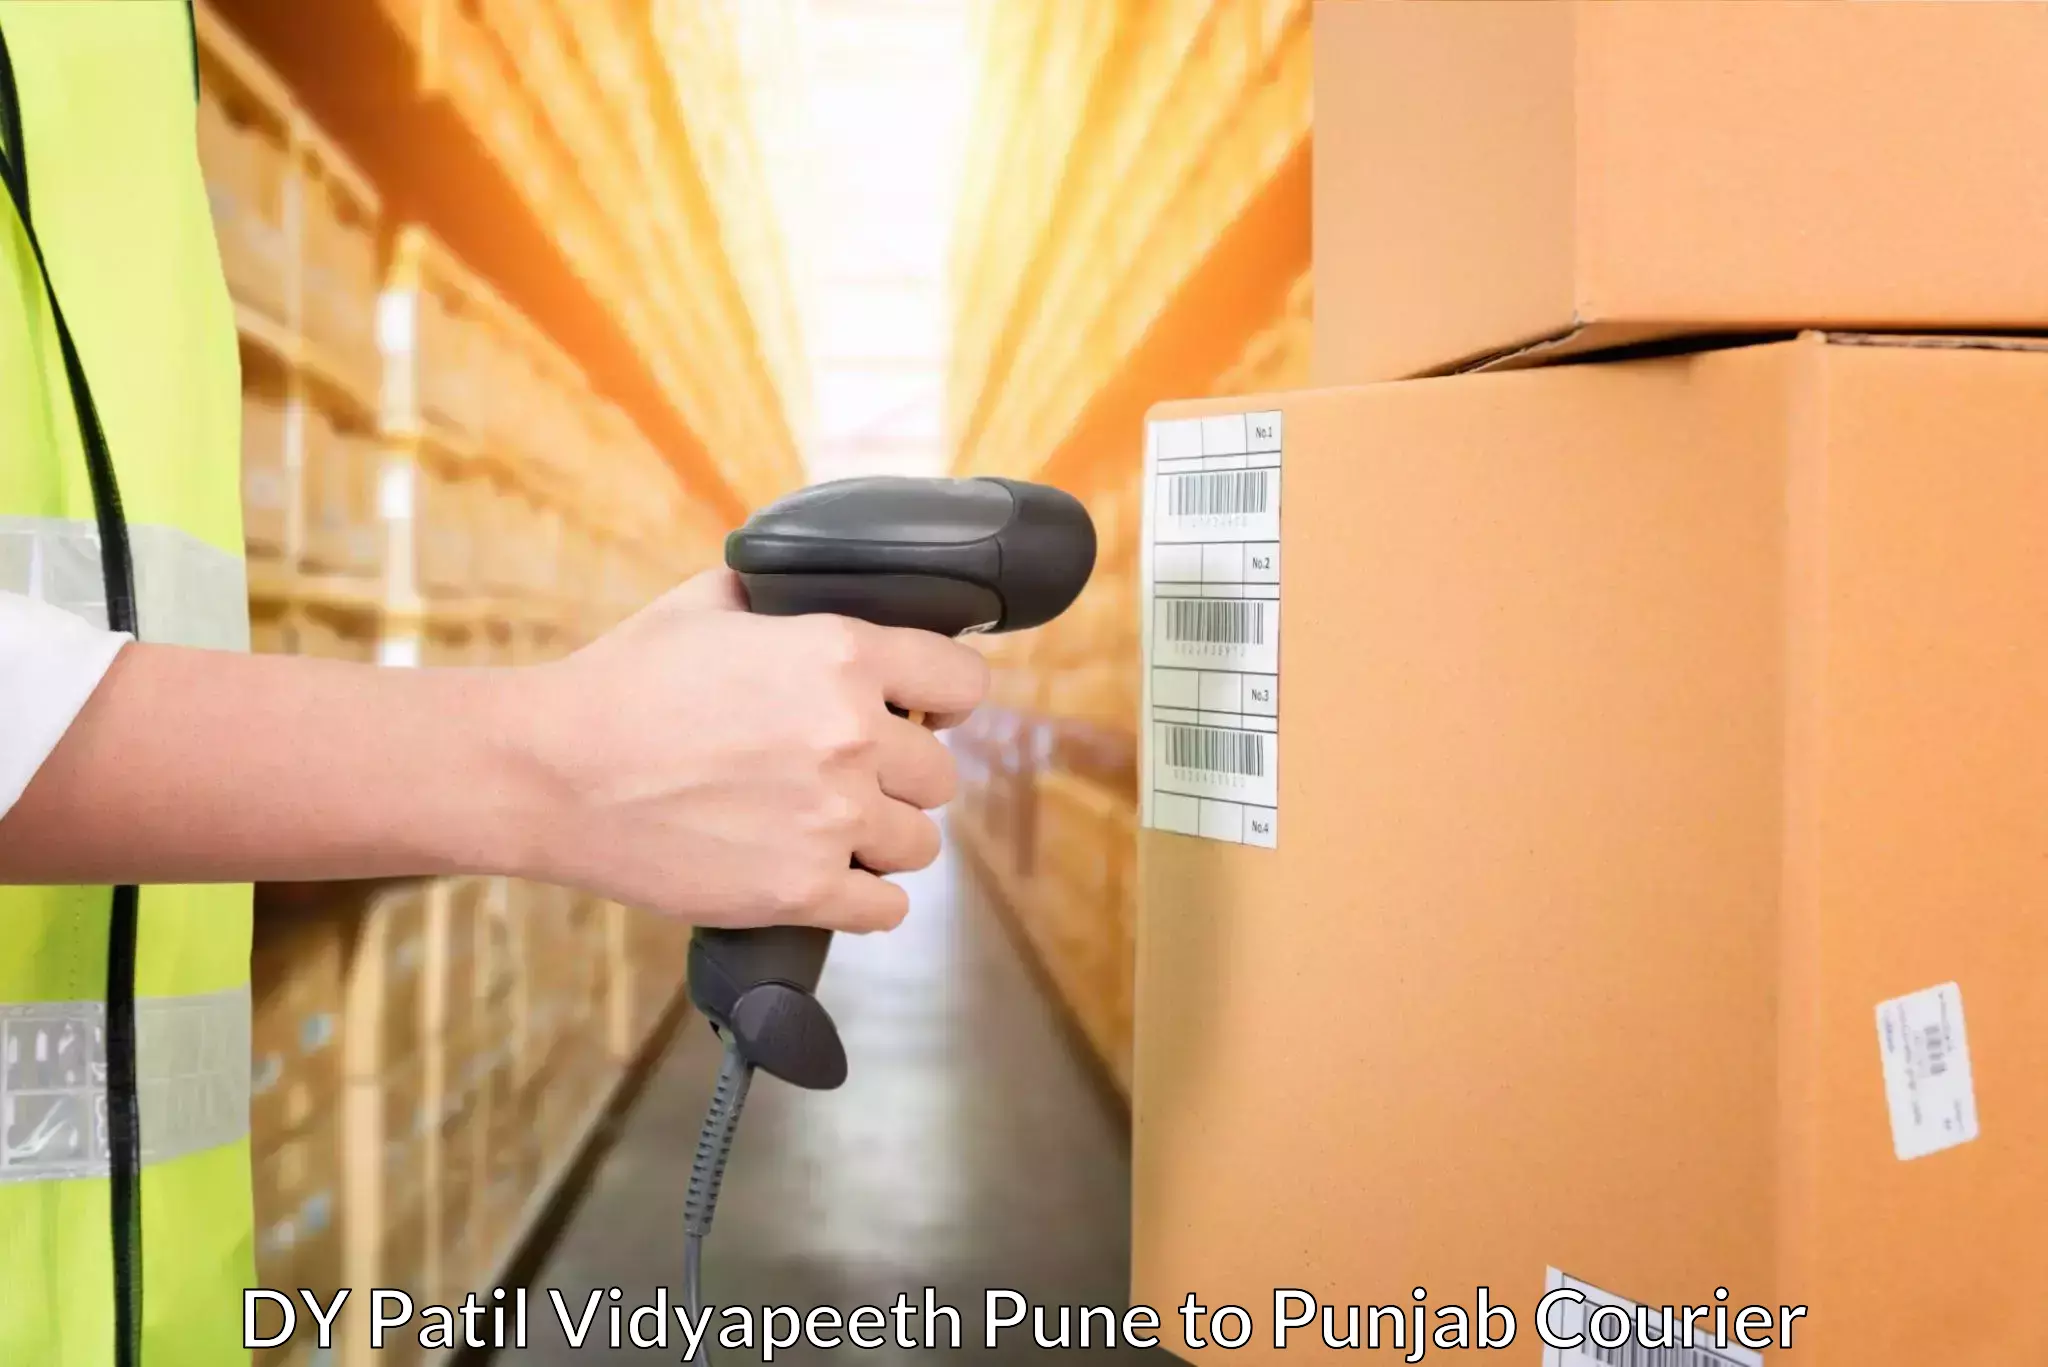 Local courier options DY Patil Vidyapeeth Pune to Fazilka